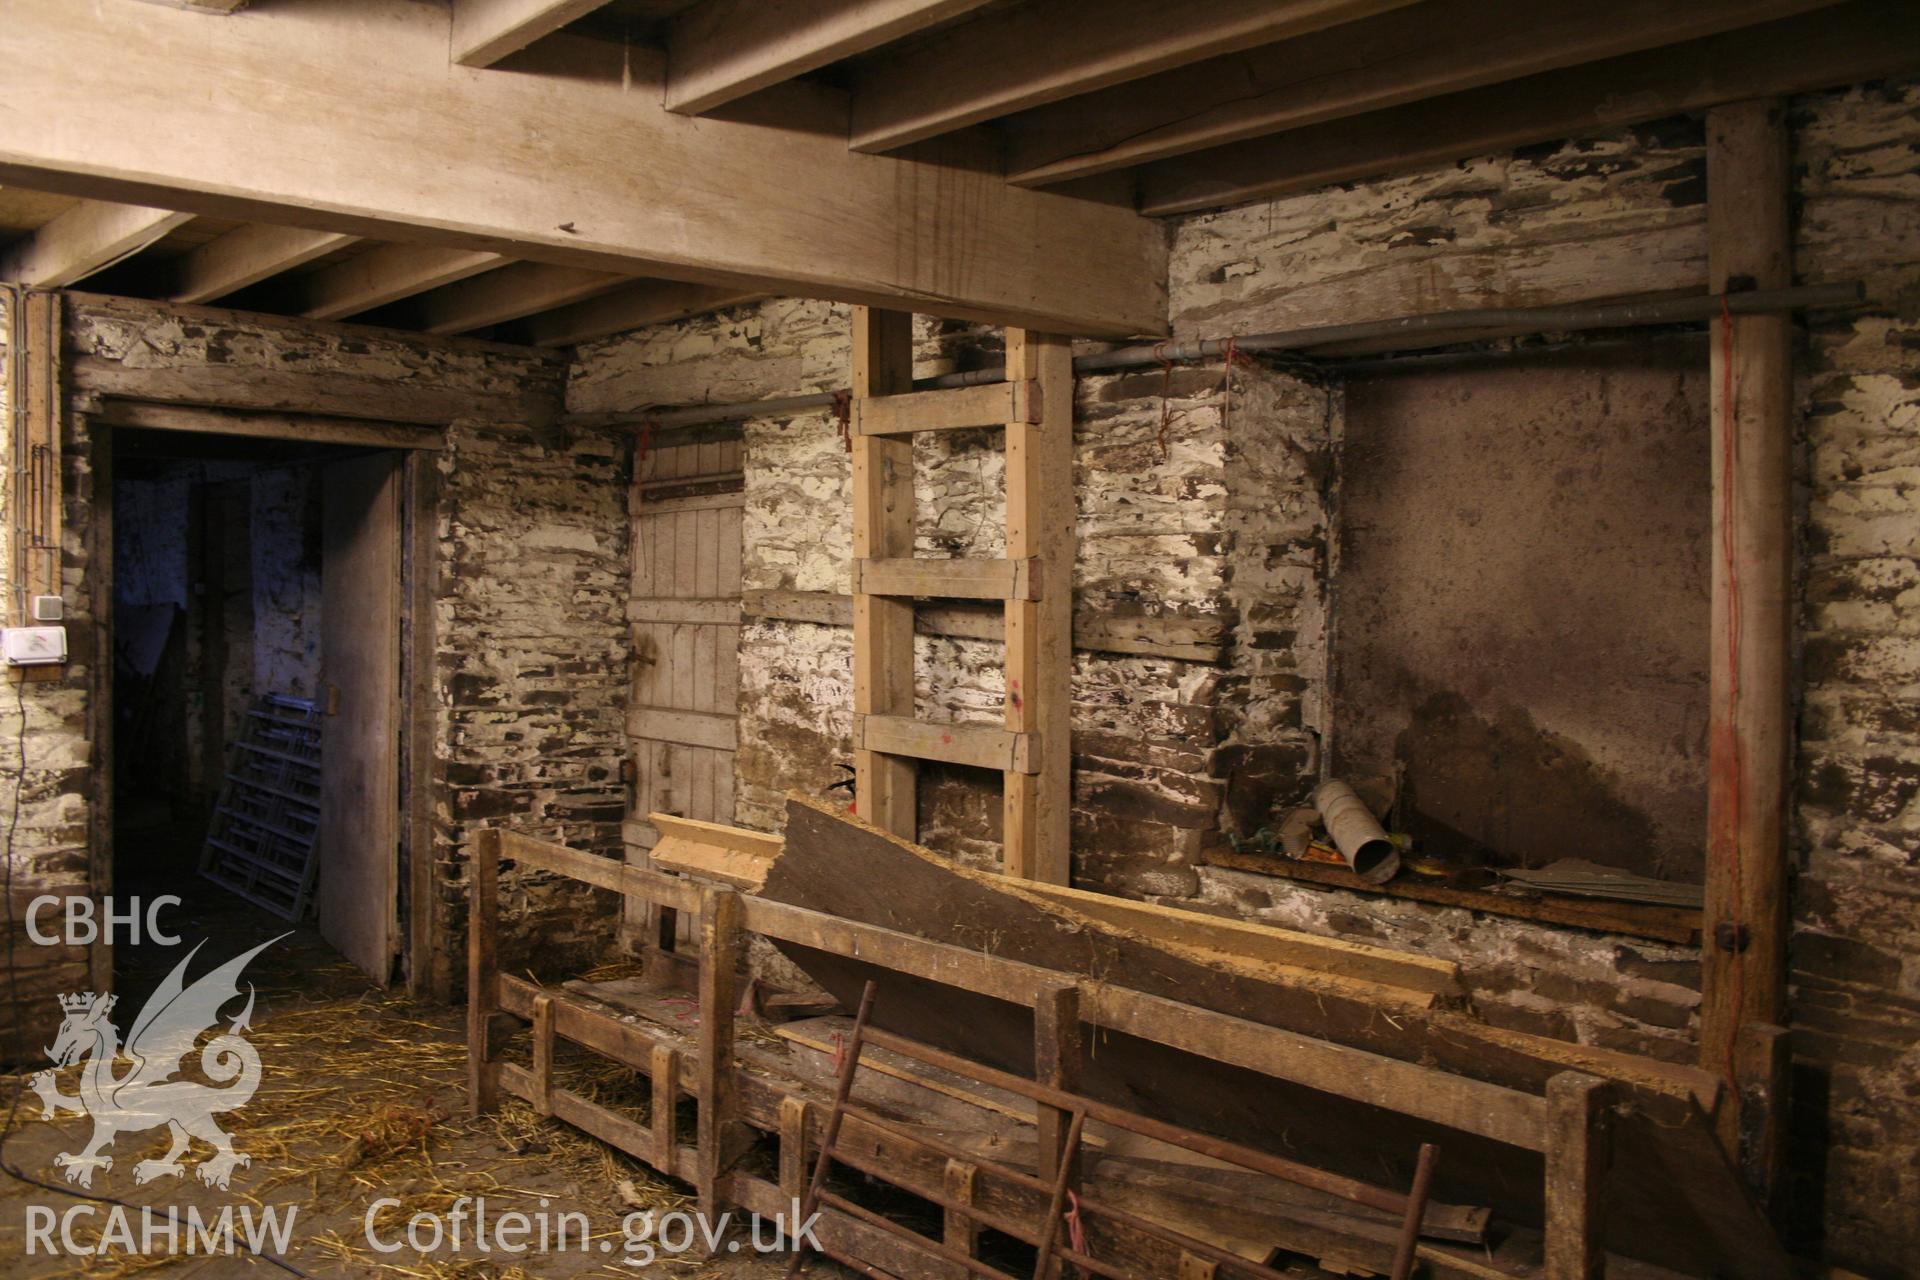 Interior view showing stone walls, wooden beams and wooden doors. Photographic survey of the threshing house, straw house, mixing house and root house at Tan-y-Graig Farm, Llanfarian, conducted by Geoff Ward and John Wiles, 11th December 2006.